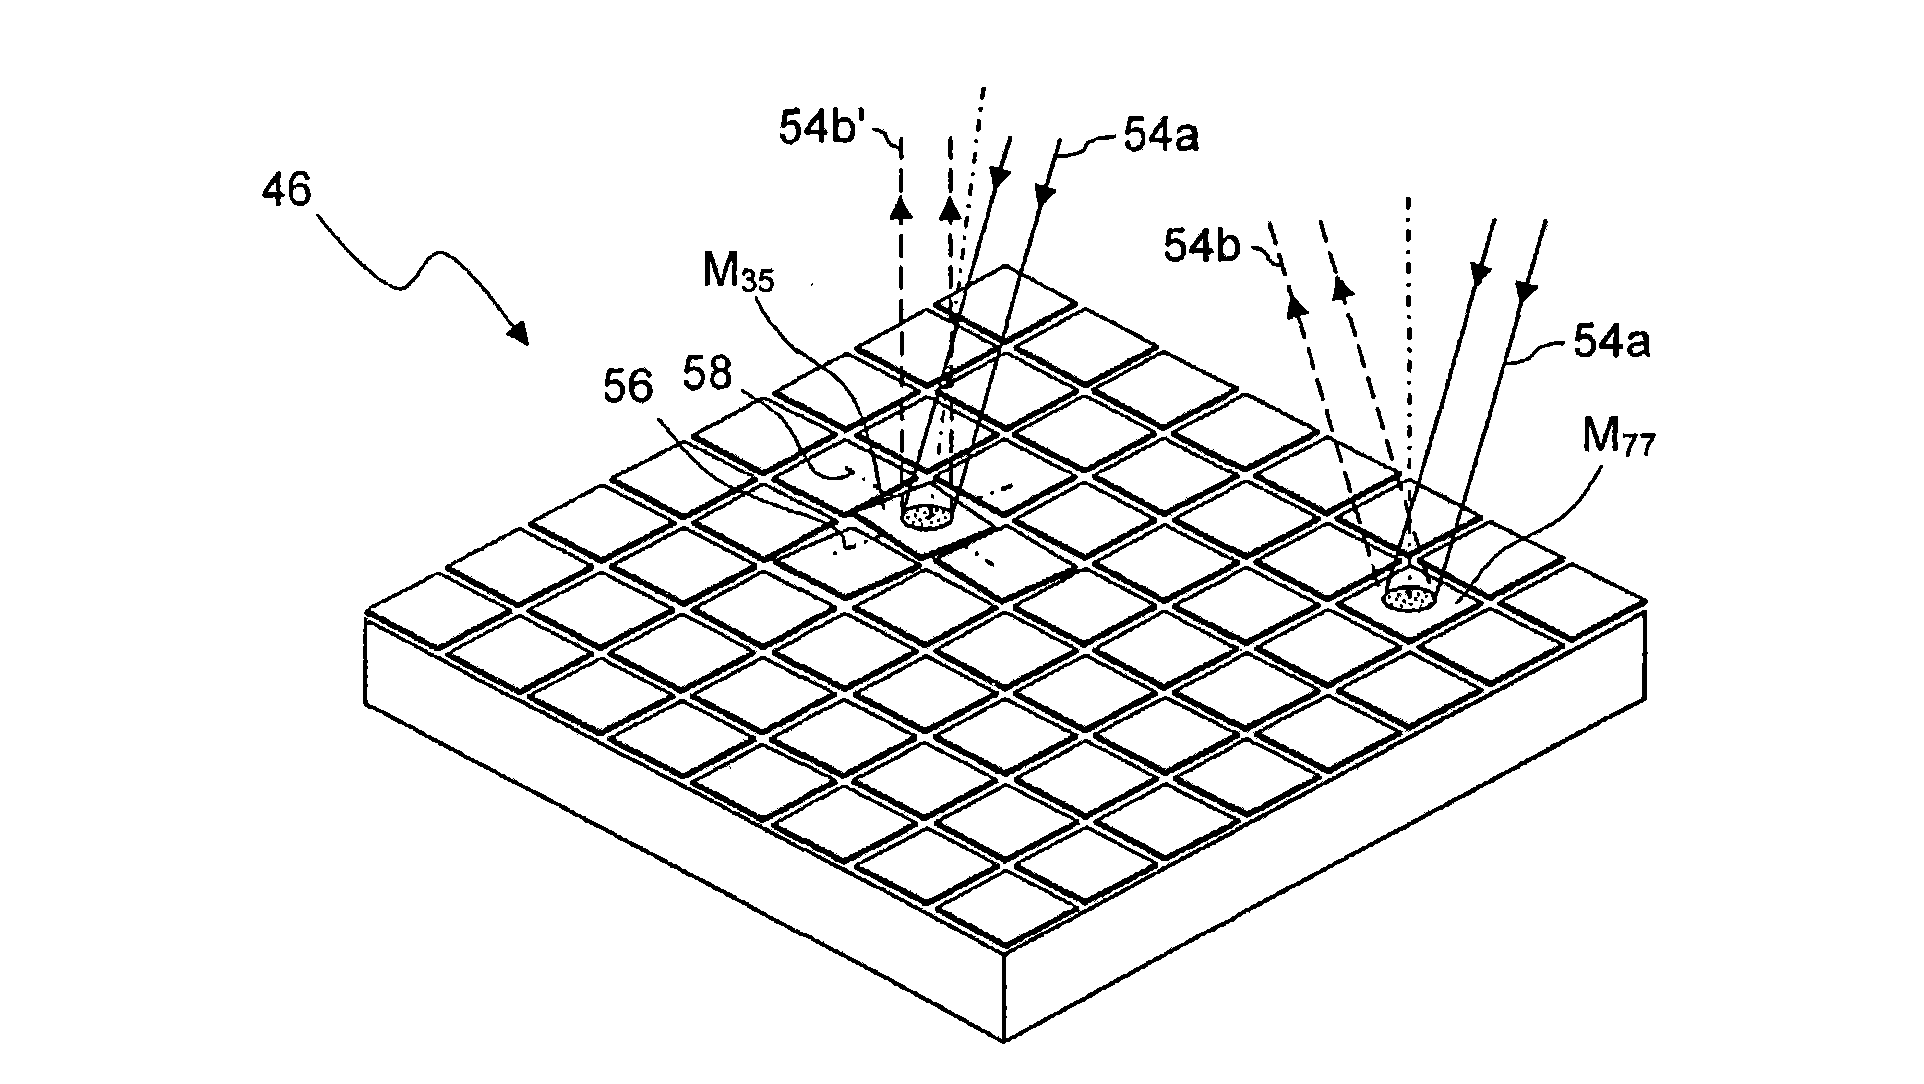 Illumination system for illuminating a mask in a microlithographic exposure apparatus